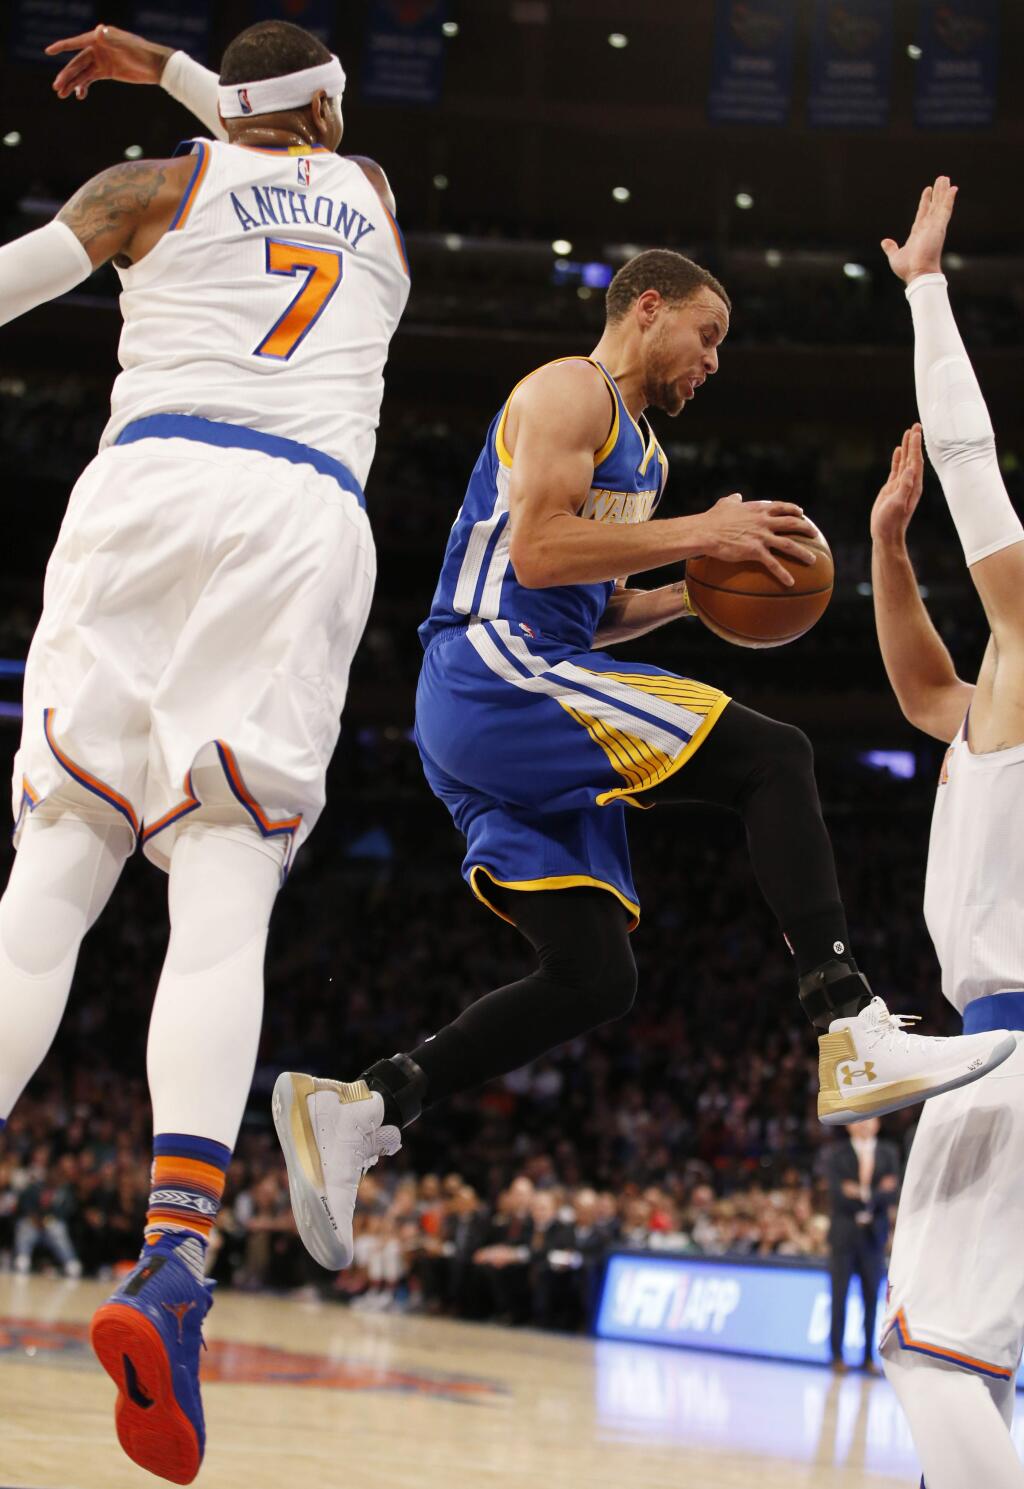 Golden State Warriors guard Stephen Curry (30) jumps through two New York Knicks defenders, including Carmelo Anthony (7), in the first half of an NBA basketball game at Madison Square Garden in New York, Sunday, March 5, 2017. (AP Photo/Kathy Willens)